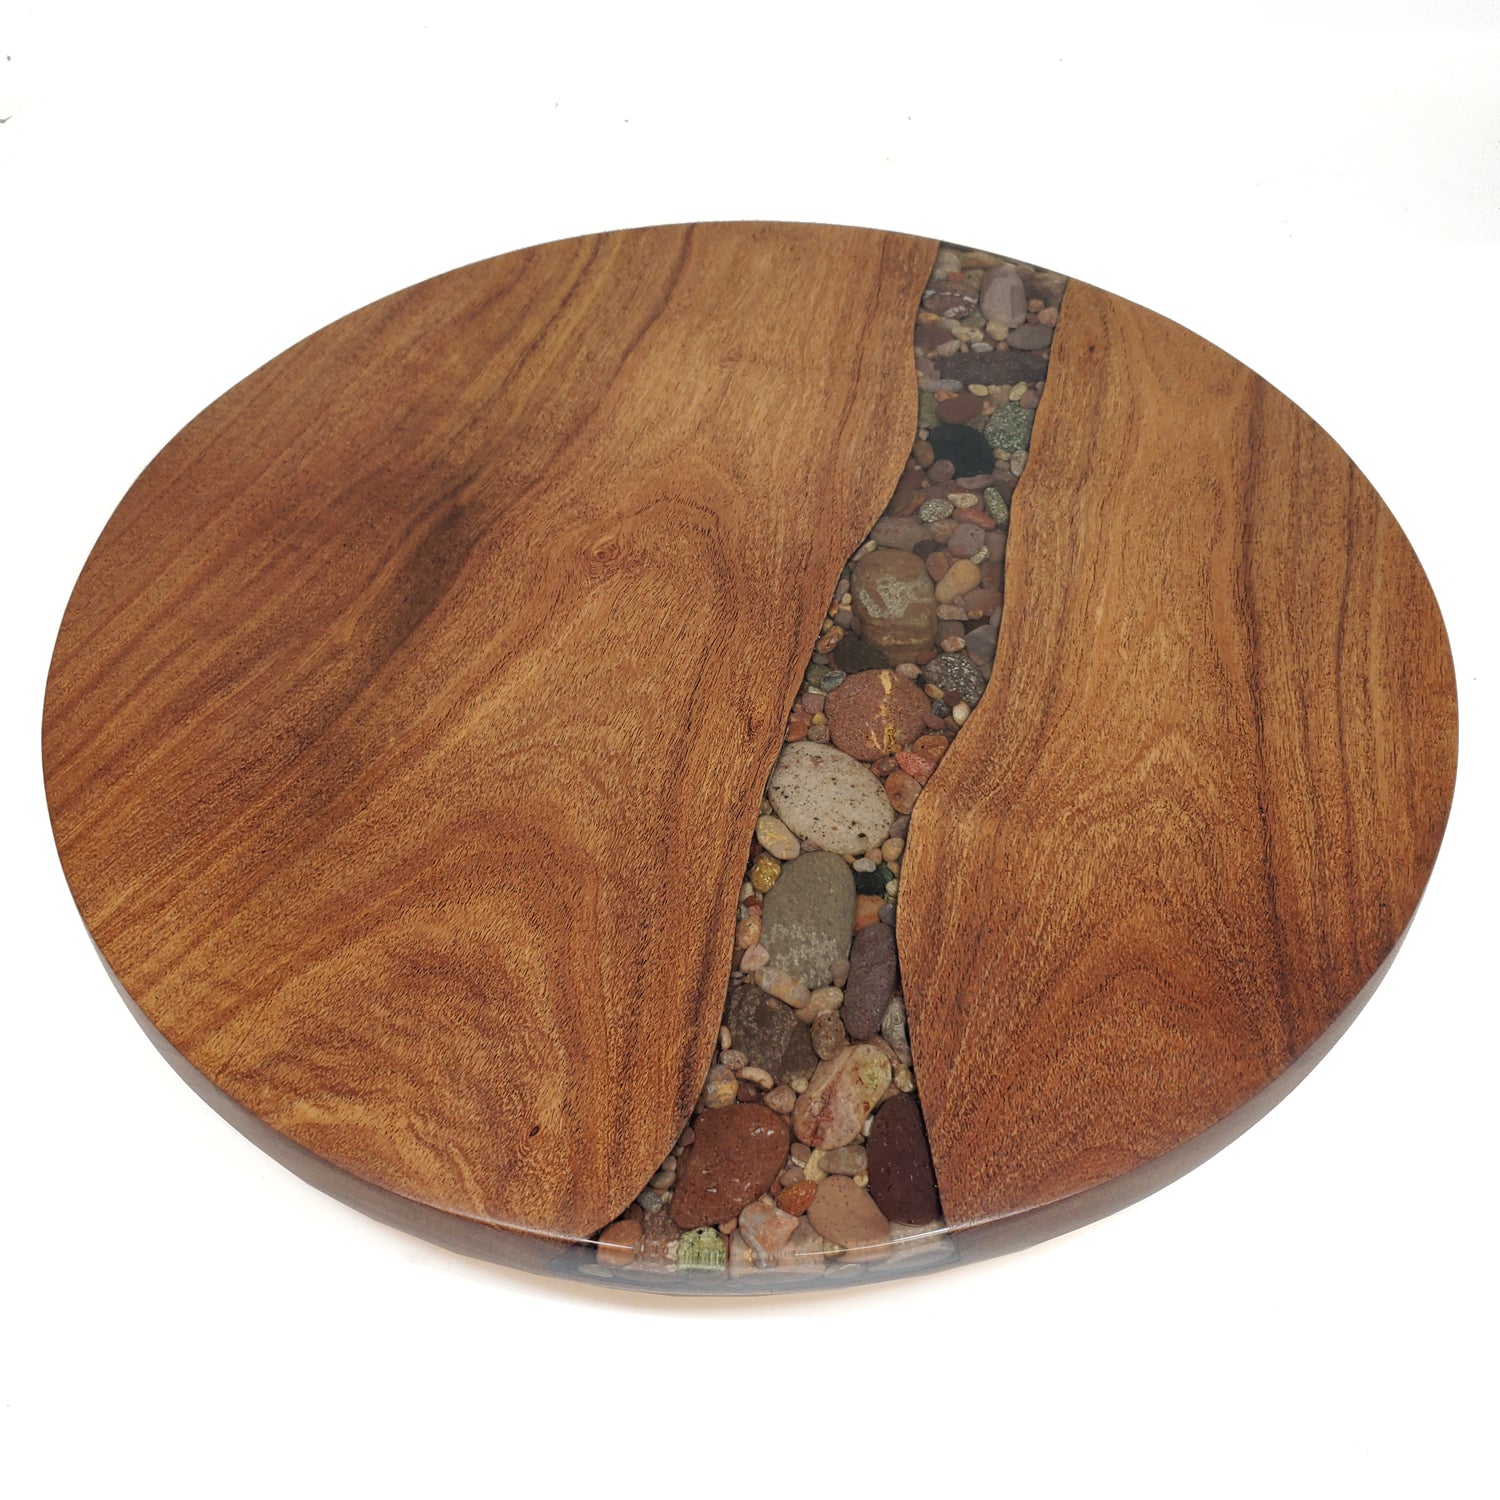 Mesquite Lazy Susan with River Rock Inlay